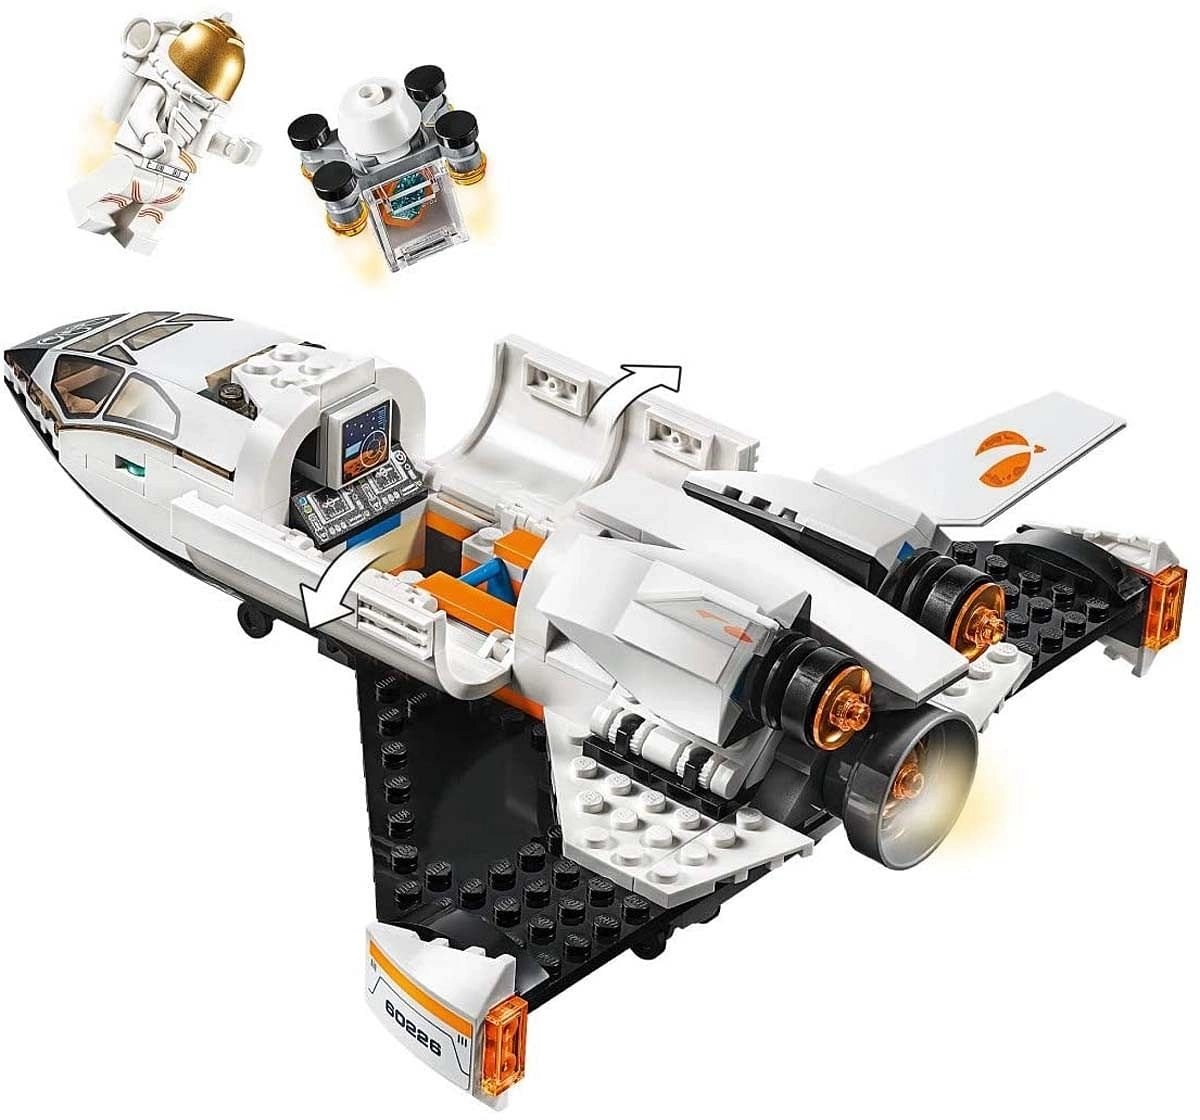 Lego City 60226 Mars Research Shuttle Blocks for Kids age 5Y+ 